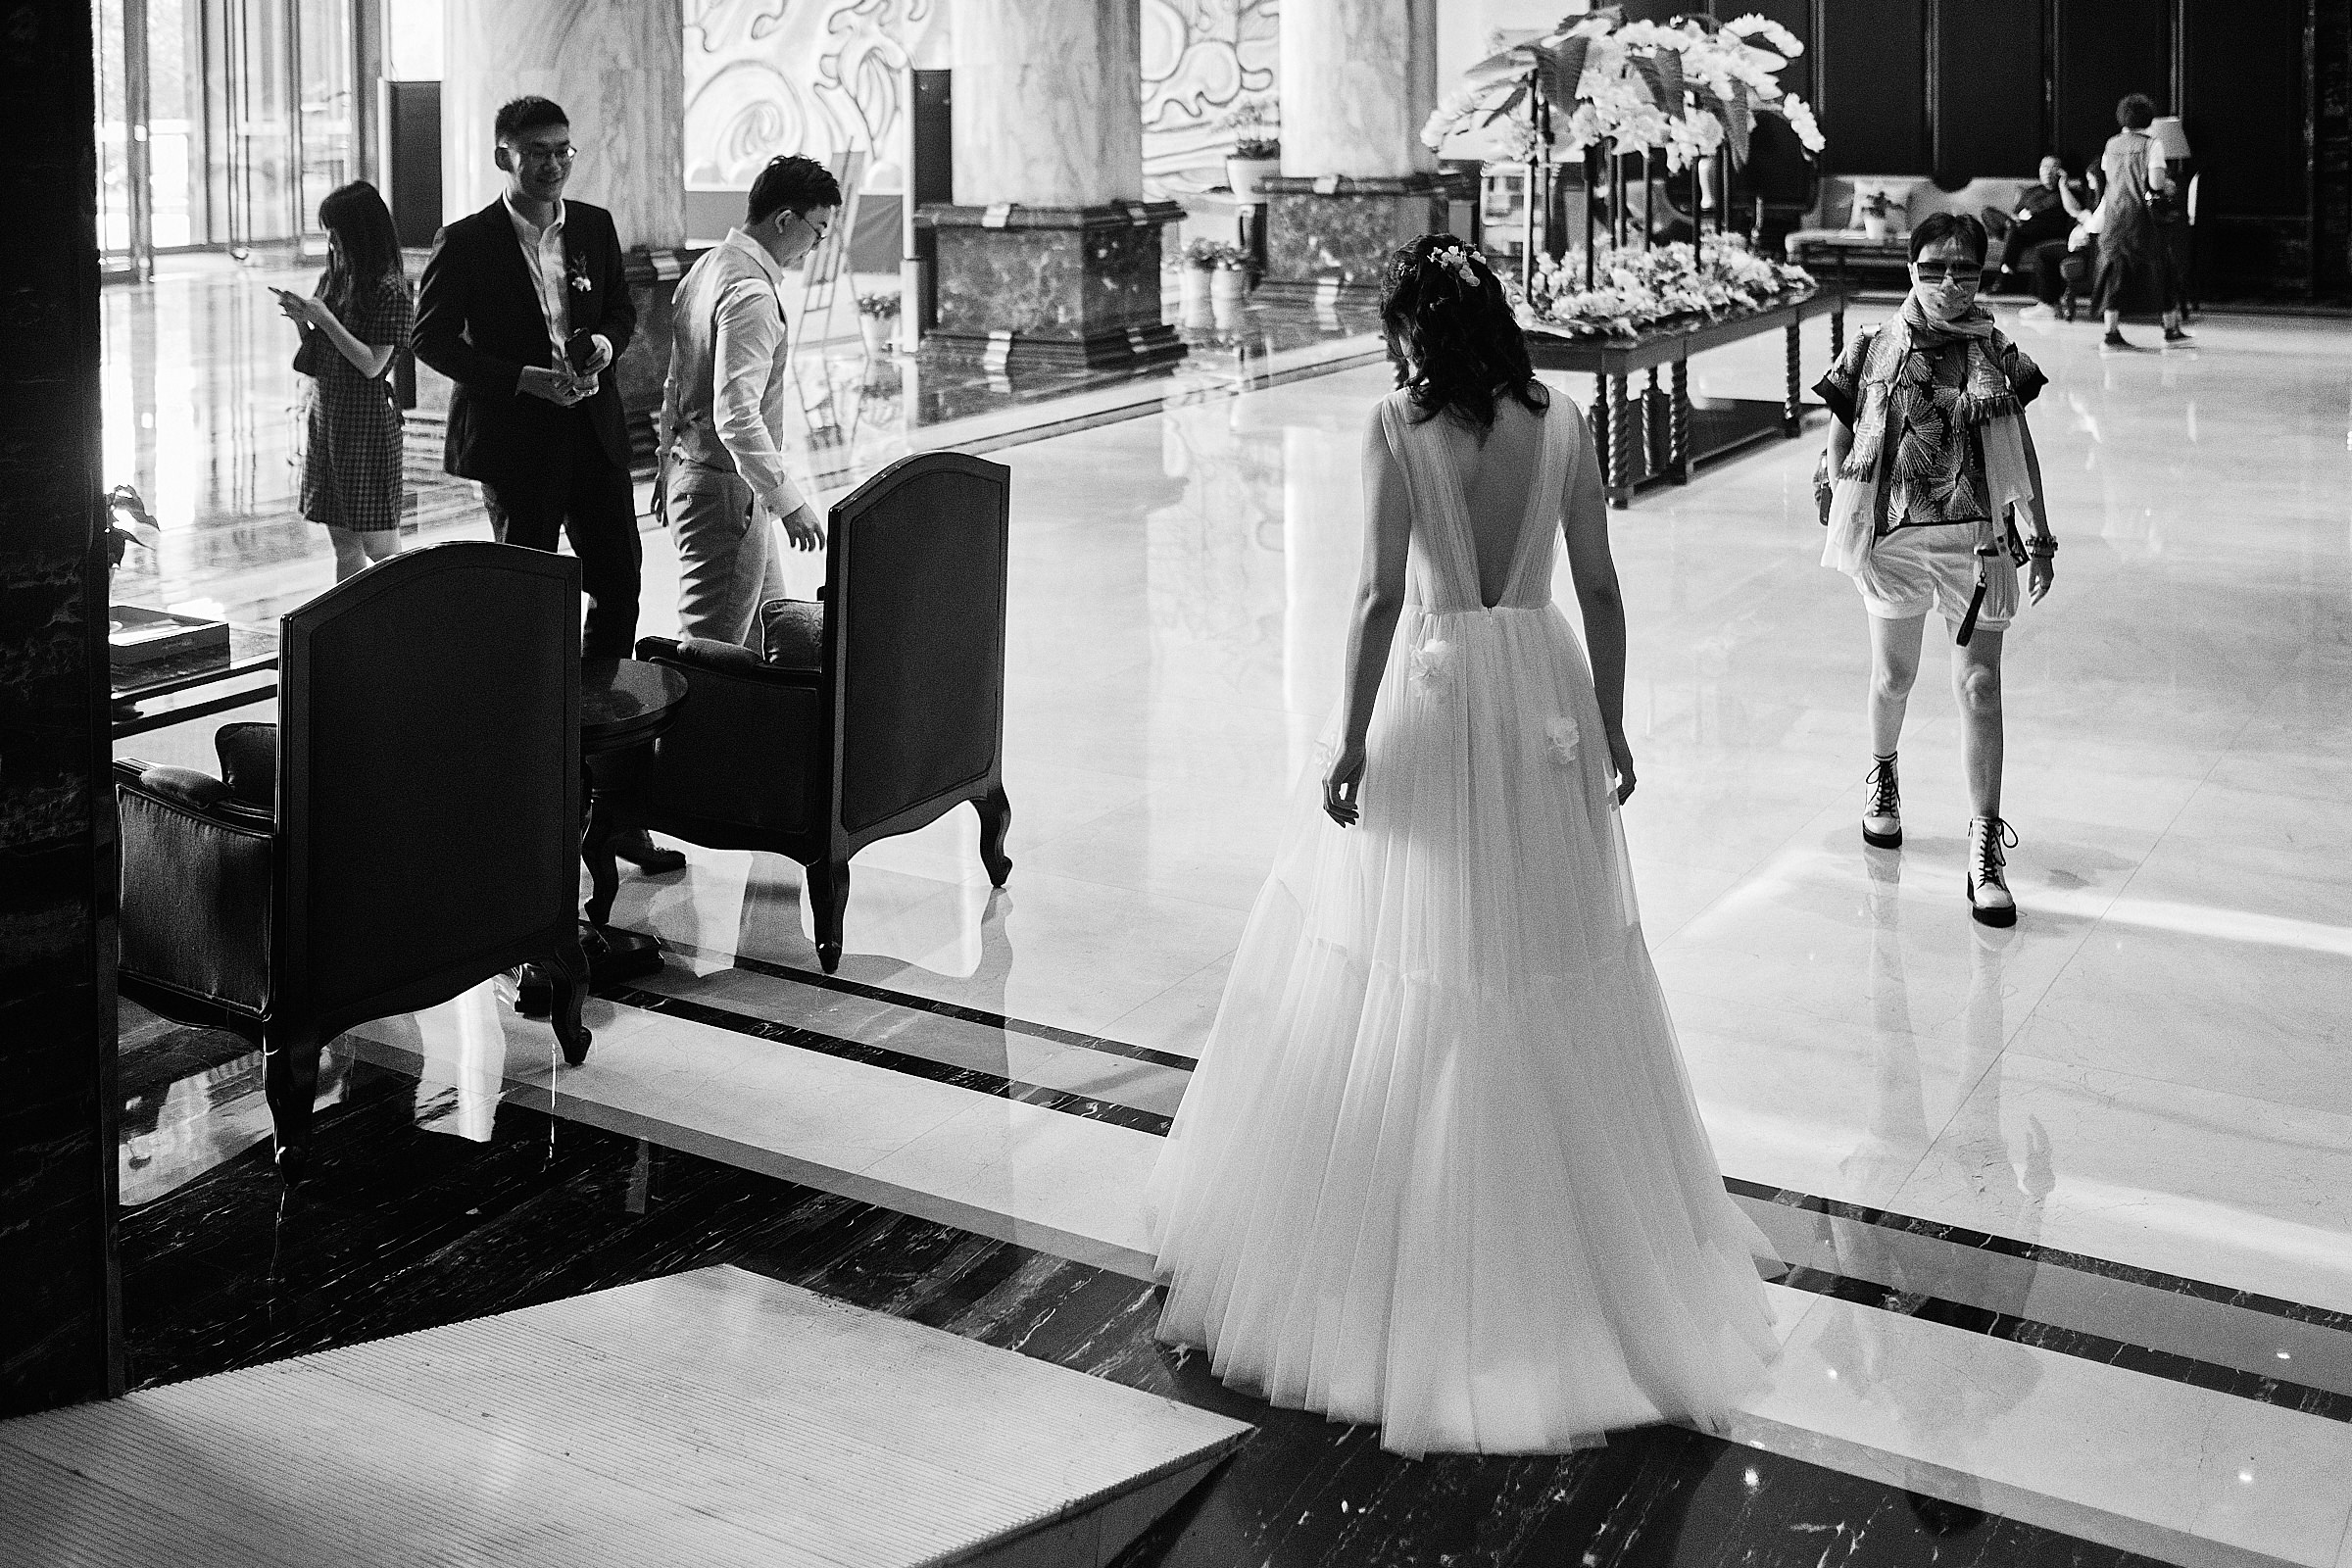 Bride Enters Lobby Of The Wedding Venue In Black And White